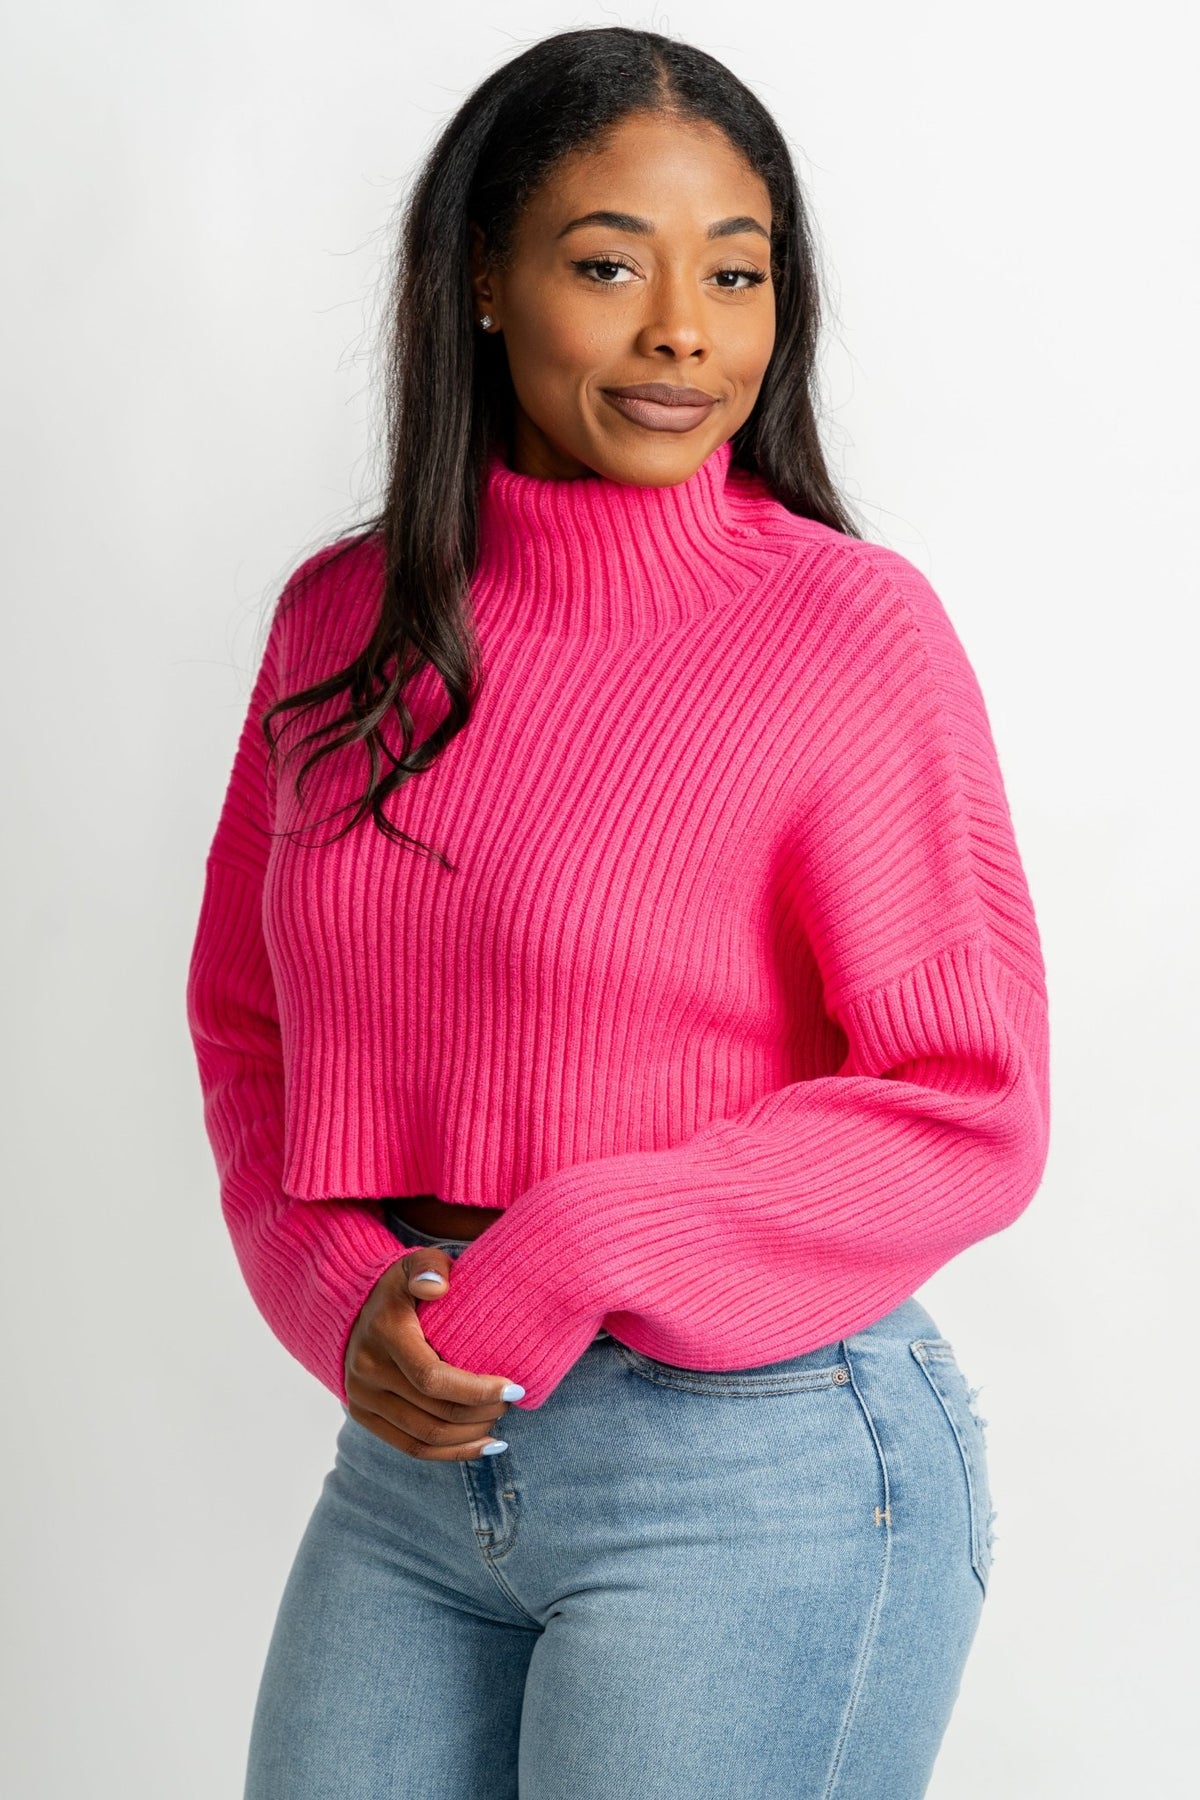 Crop turtleneck sweater pink – Boutique Sweaters | Fashionable Sweaters at Lush Fashion Lounge Boutique in Oklahoma City